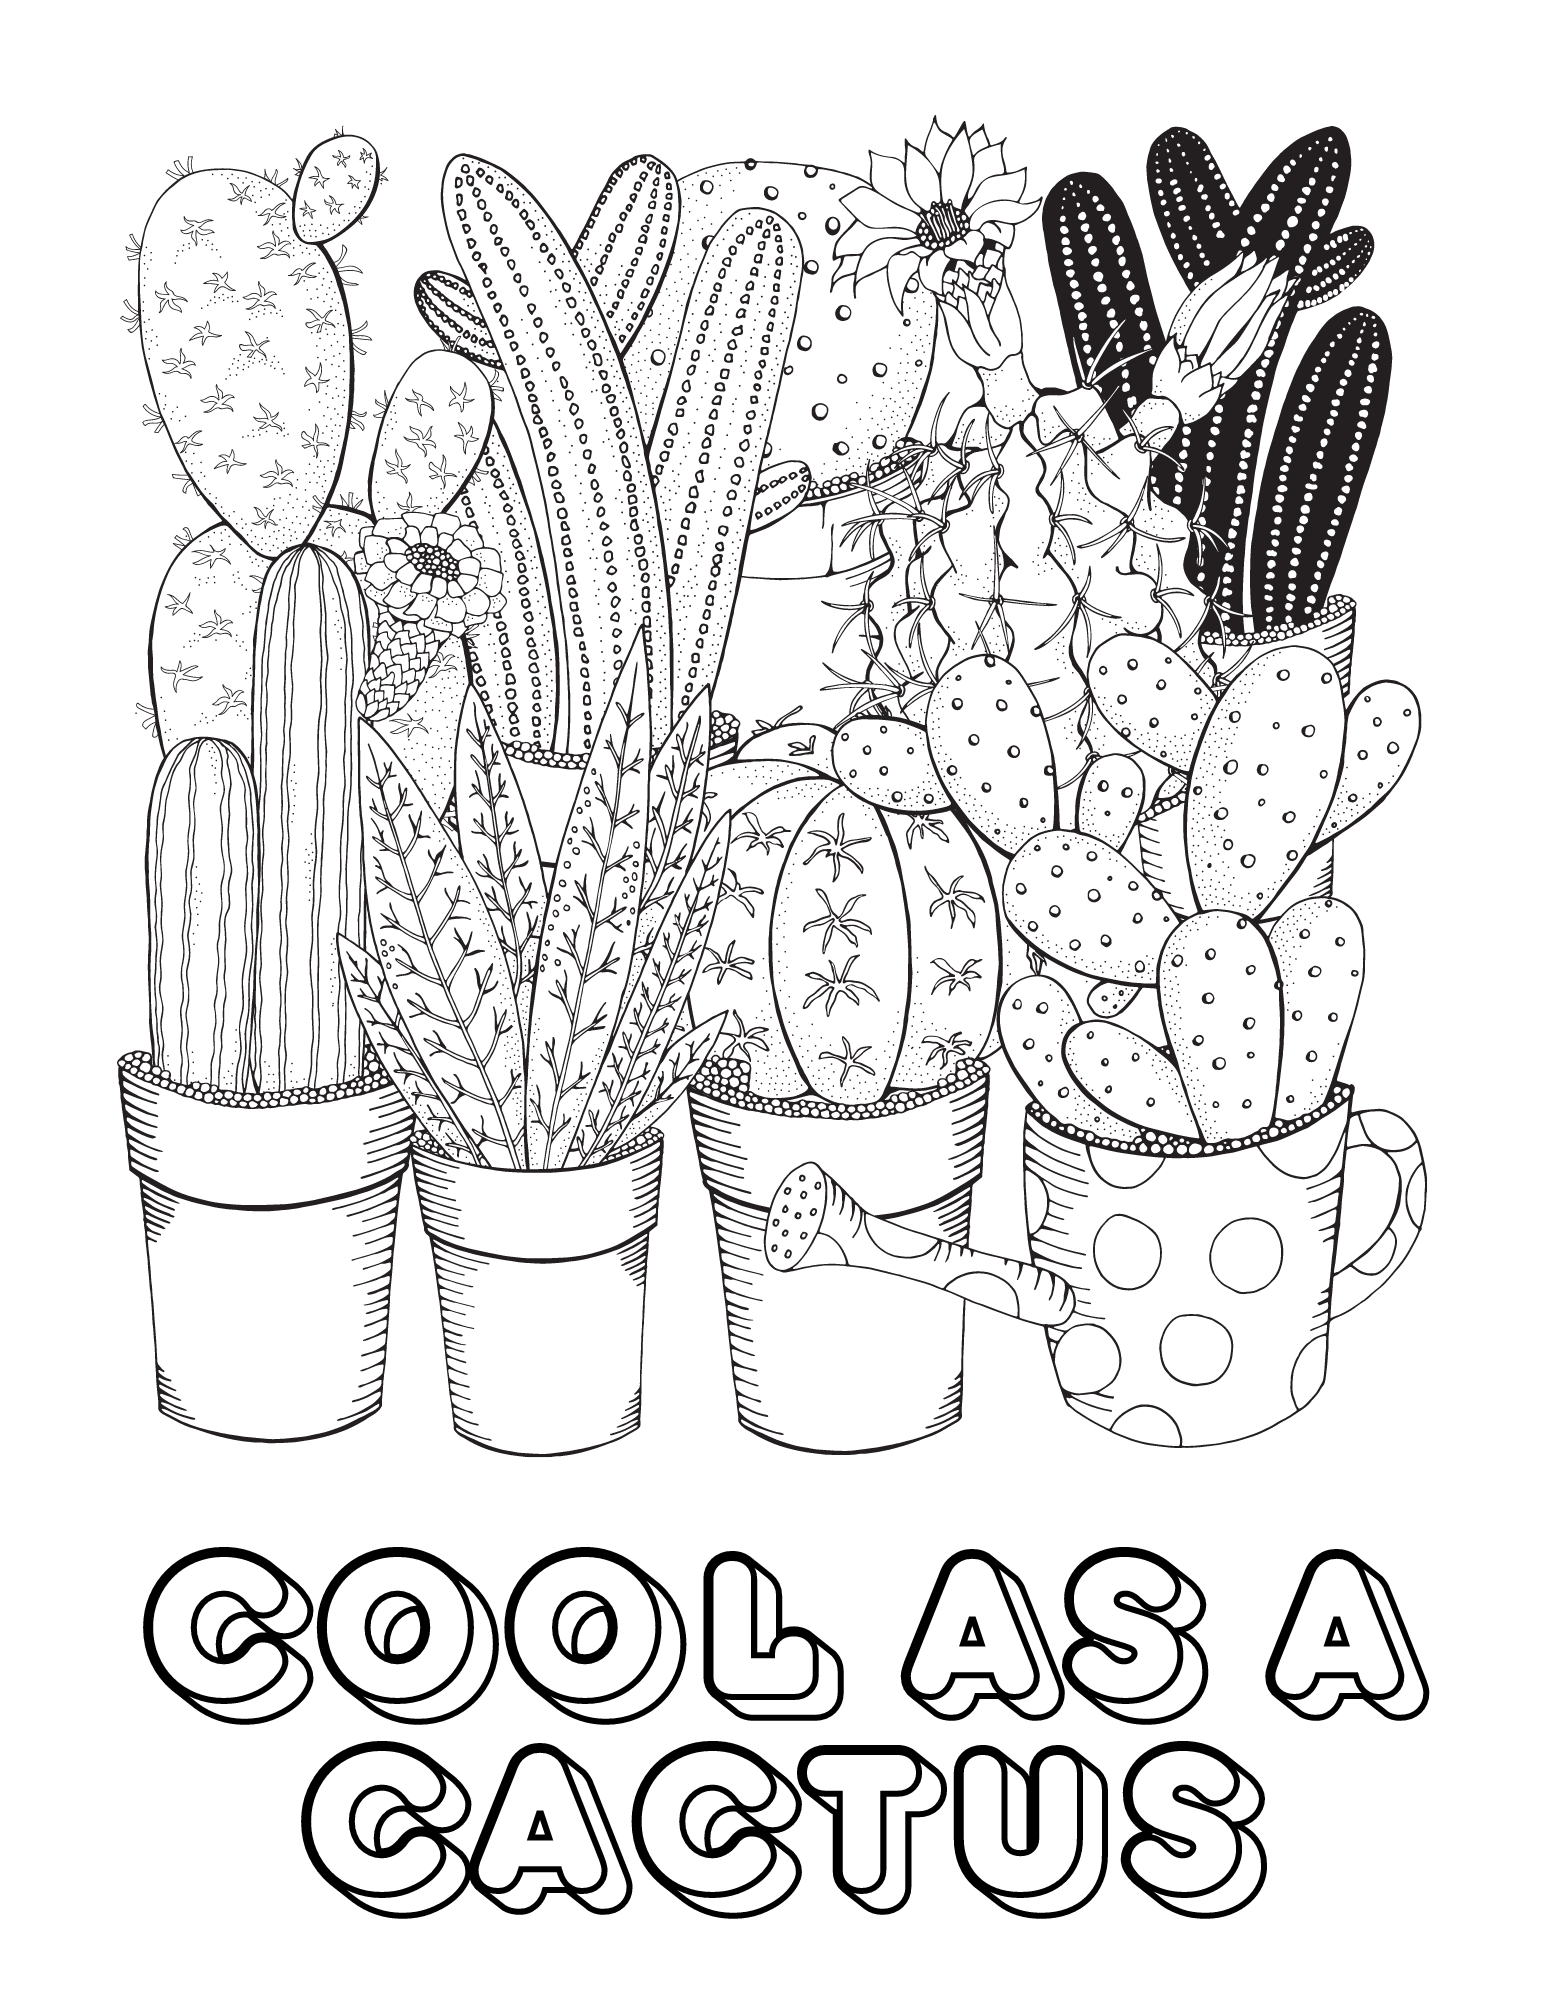 Cute cactus coloring pages for kids and adults